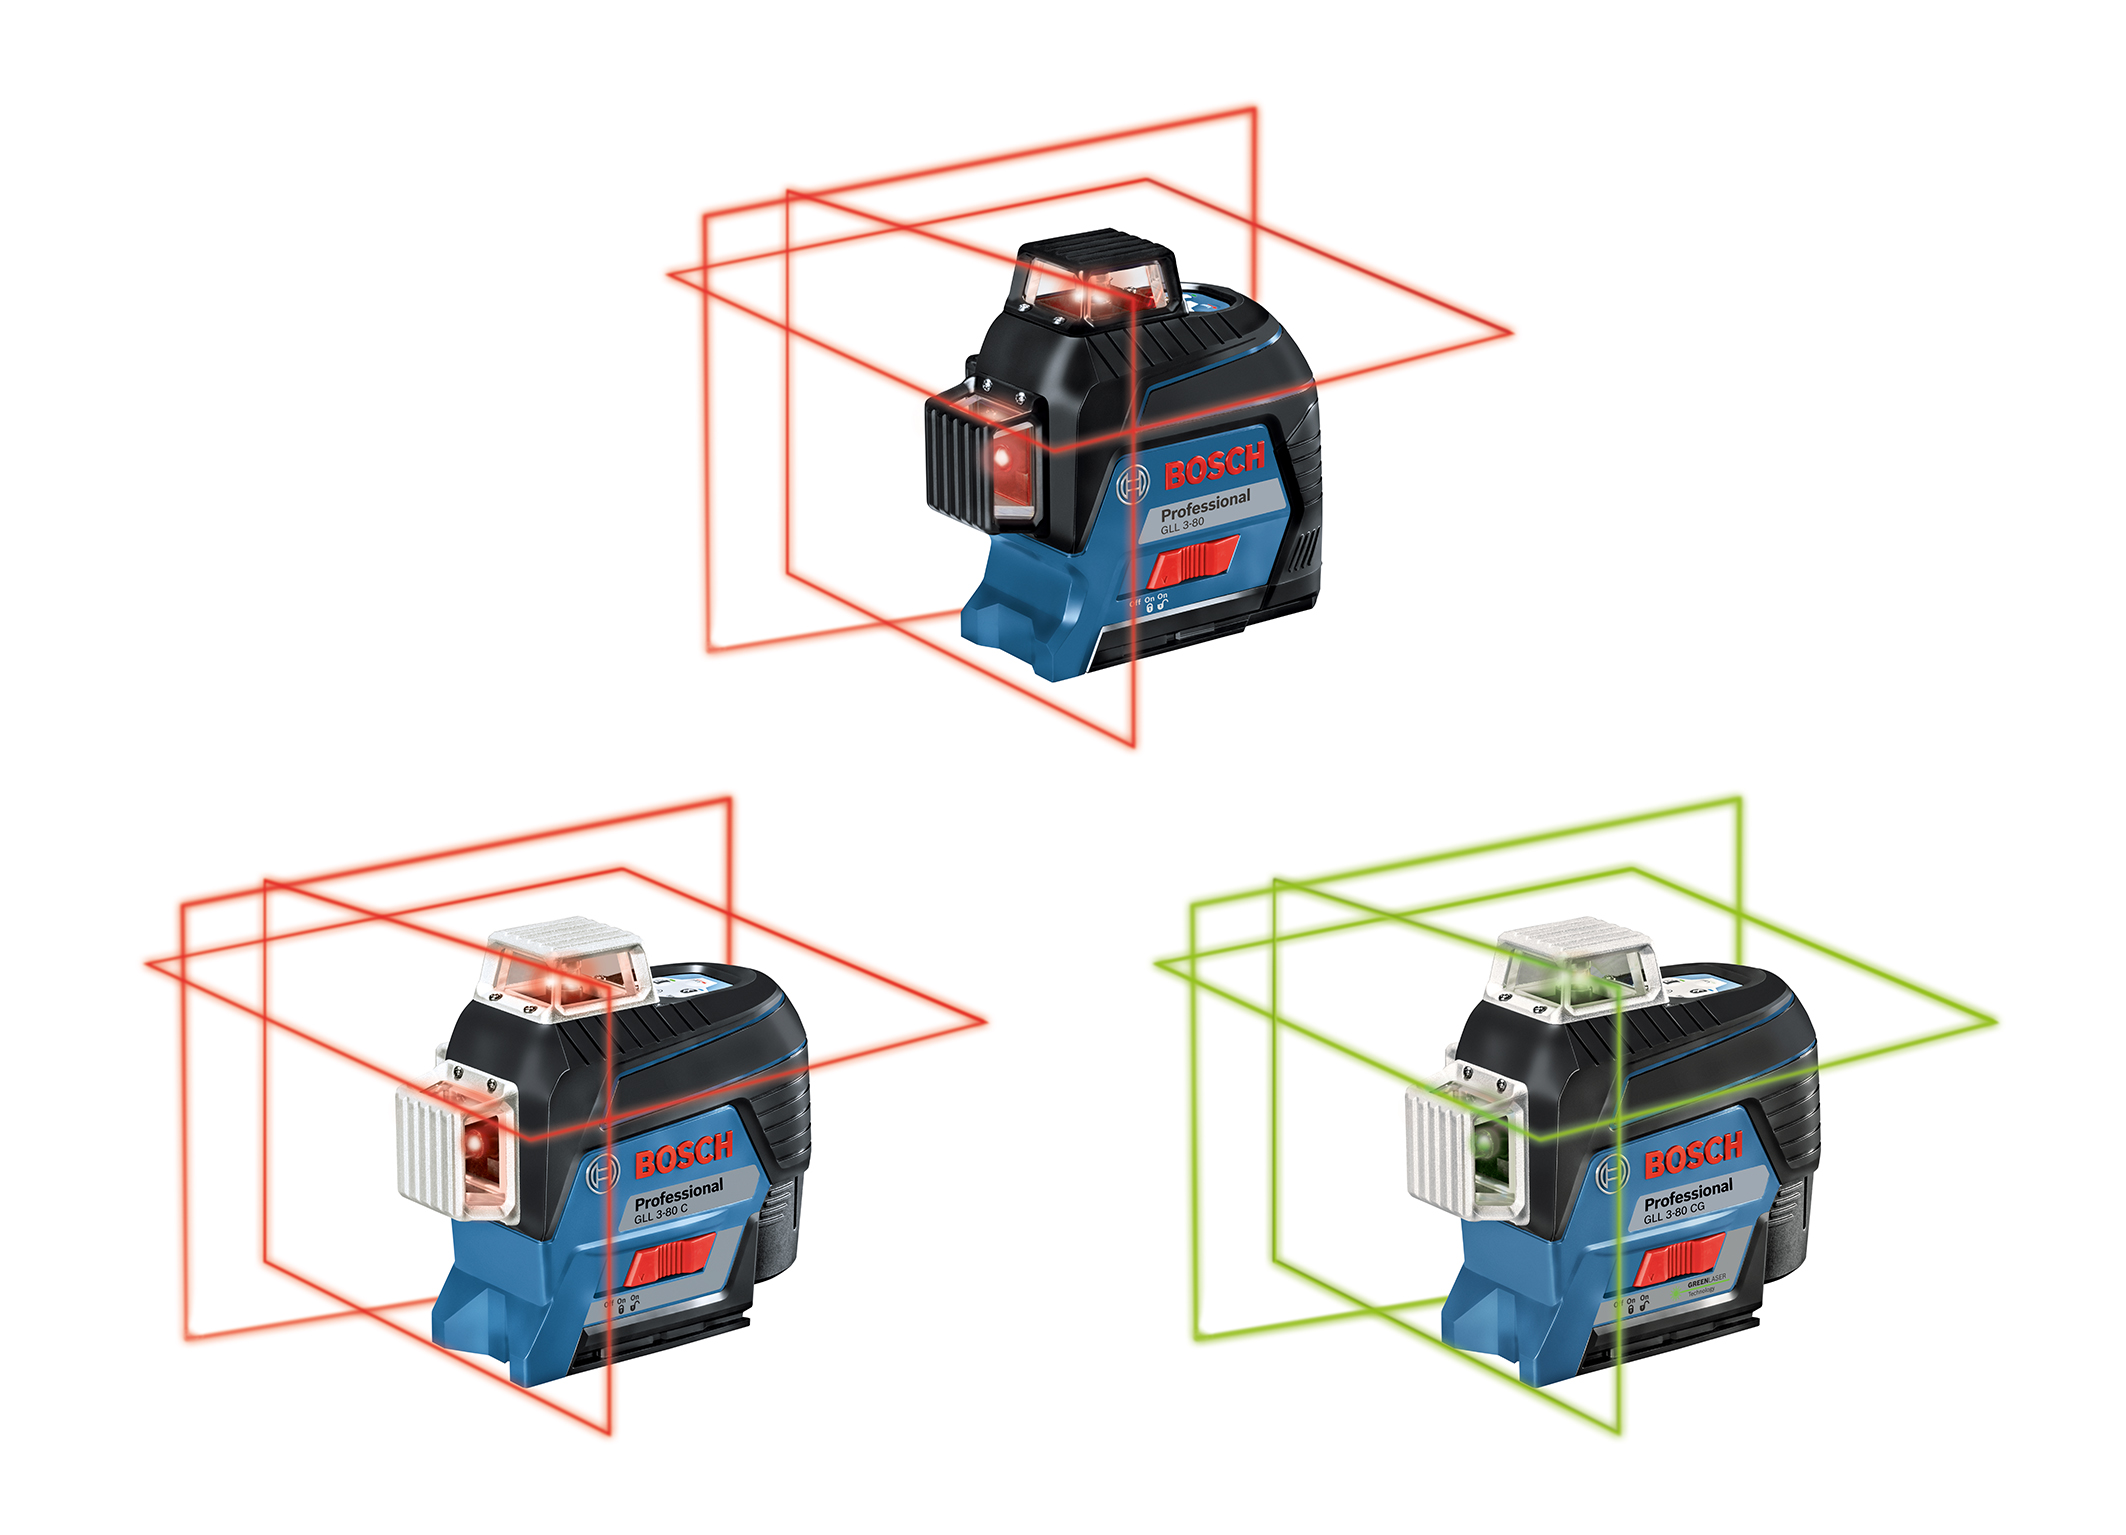 Connectivity function for precise alignment: New generation of professional Bosch line lasers 